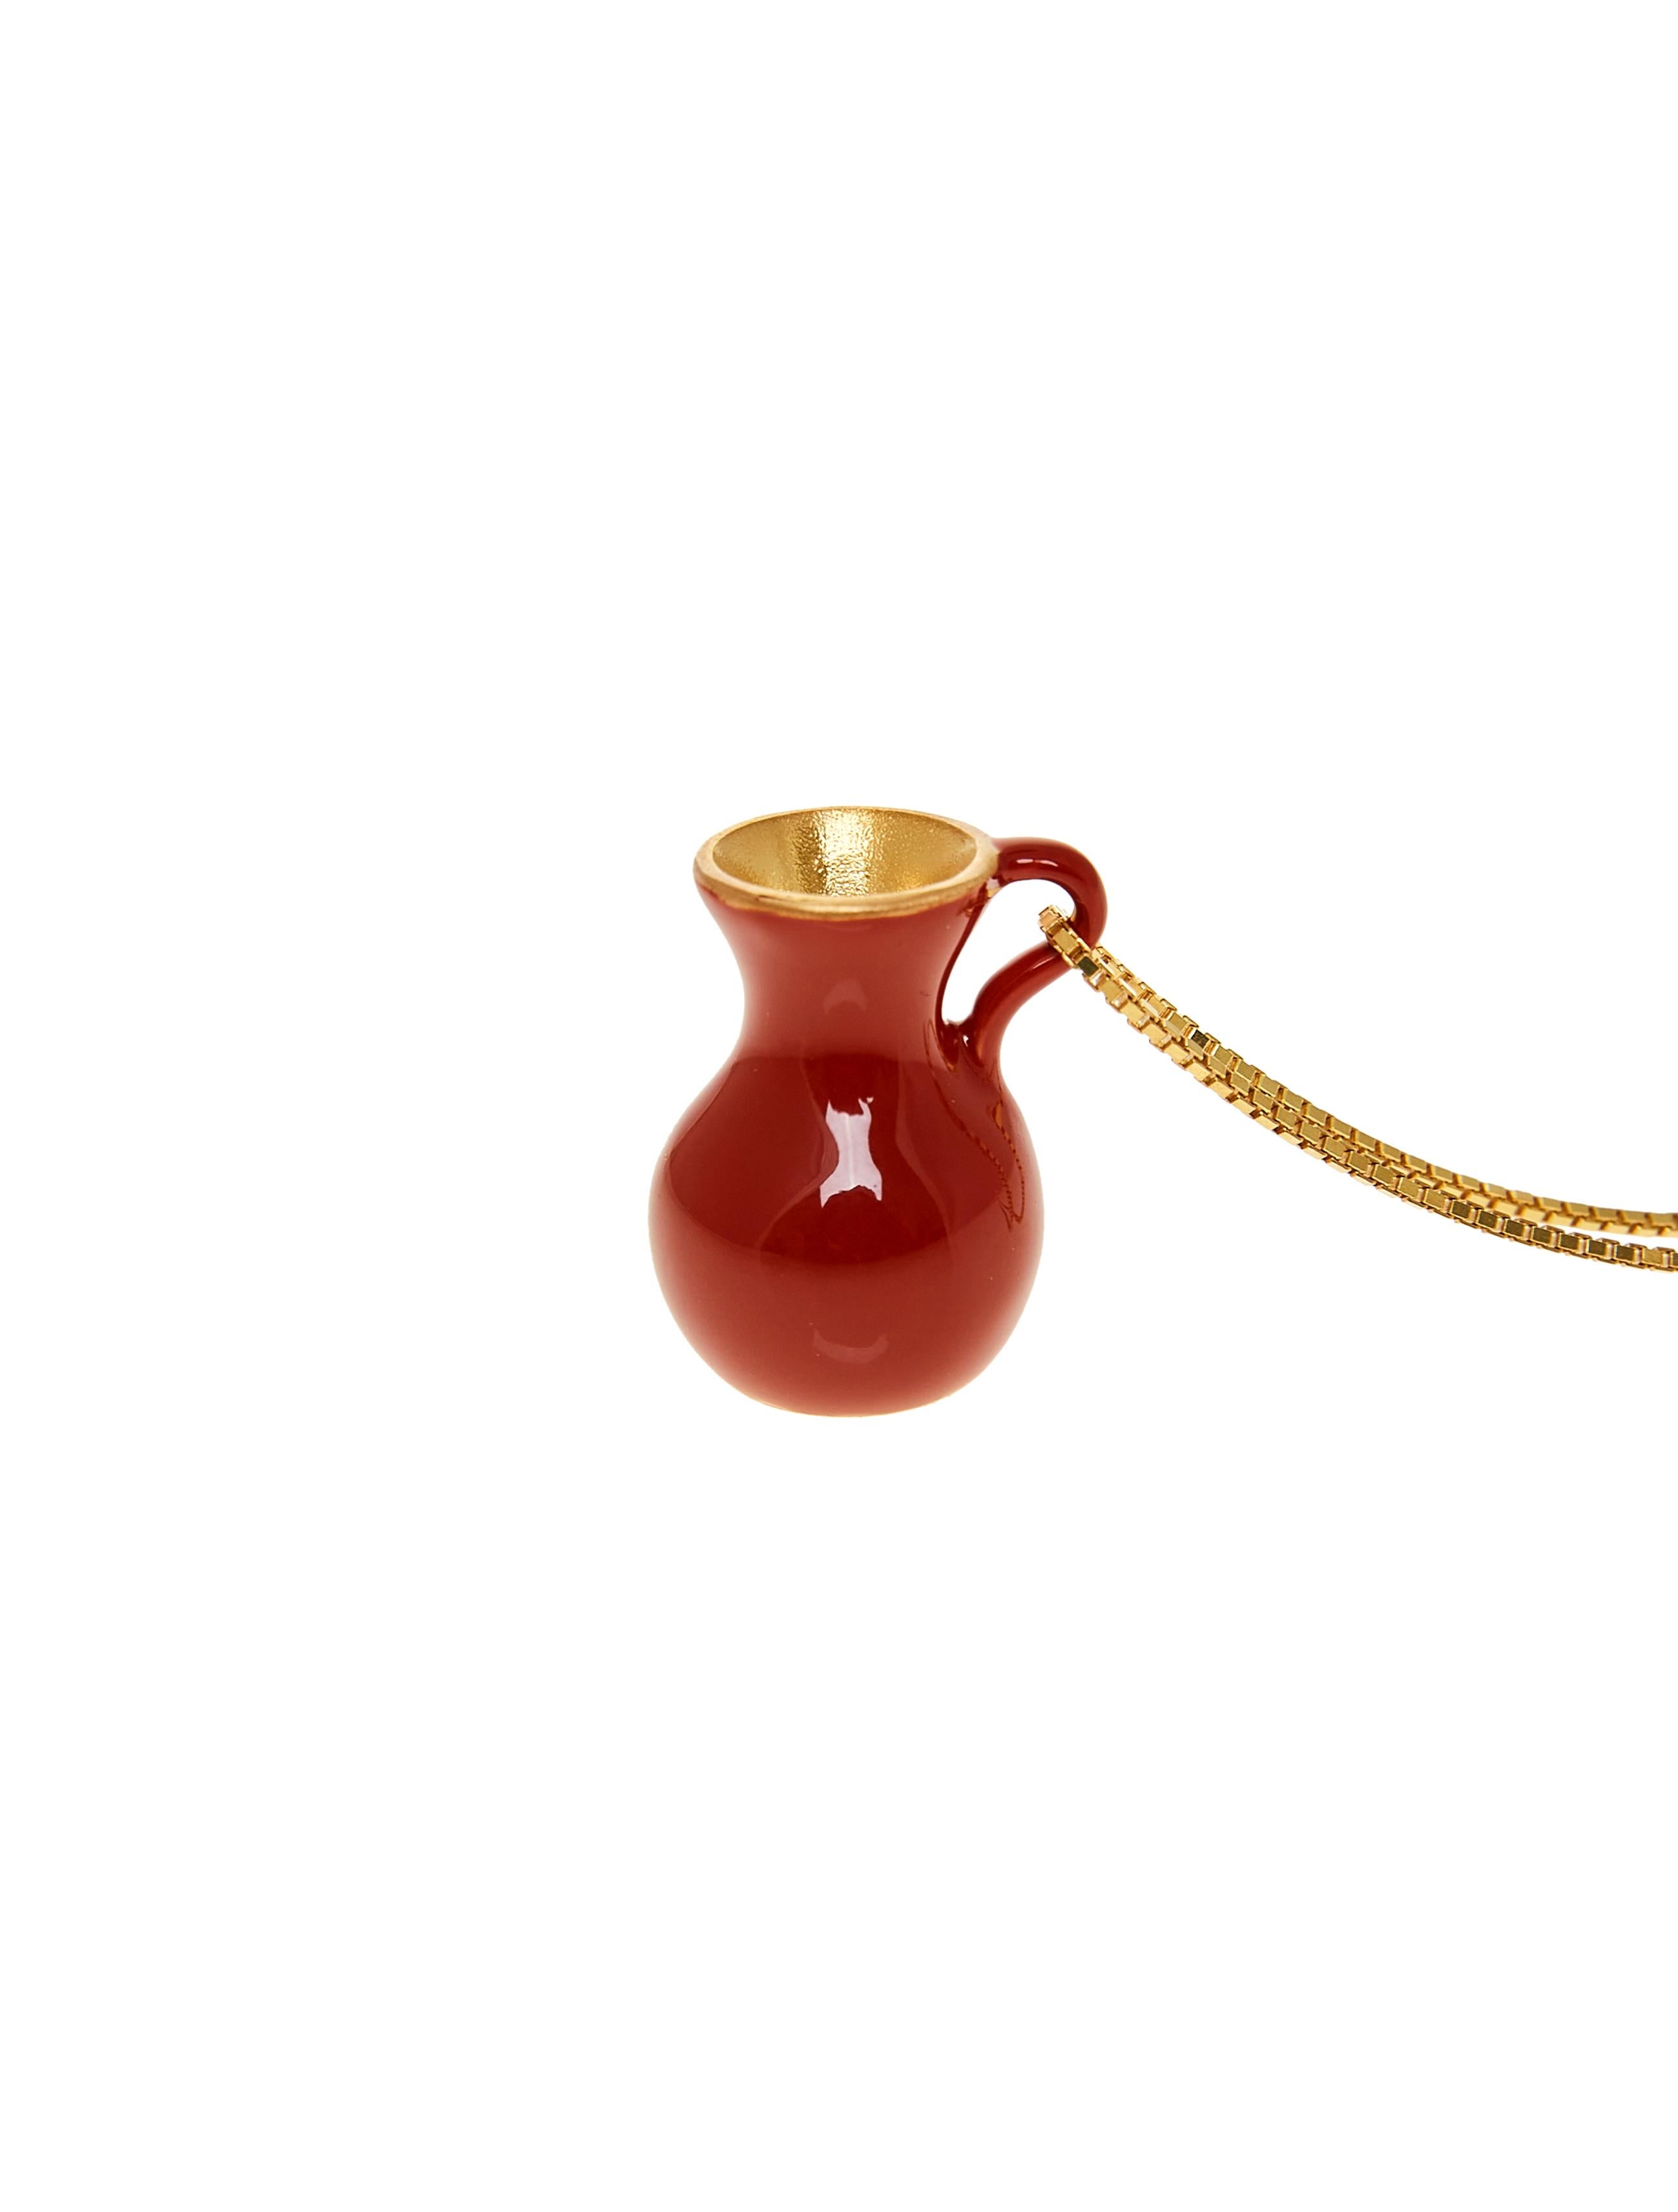 The Maggoosh lucky charm for 2021. A miniature vase for tiny flowers to keep you feeling fresh,warm and connected to nature and our Mother Earth during these times.

Hand-crafted by local skilled Greek craftsmen.

This piece belongs to the Glow